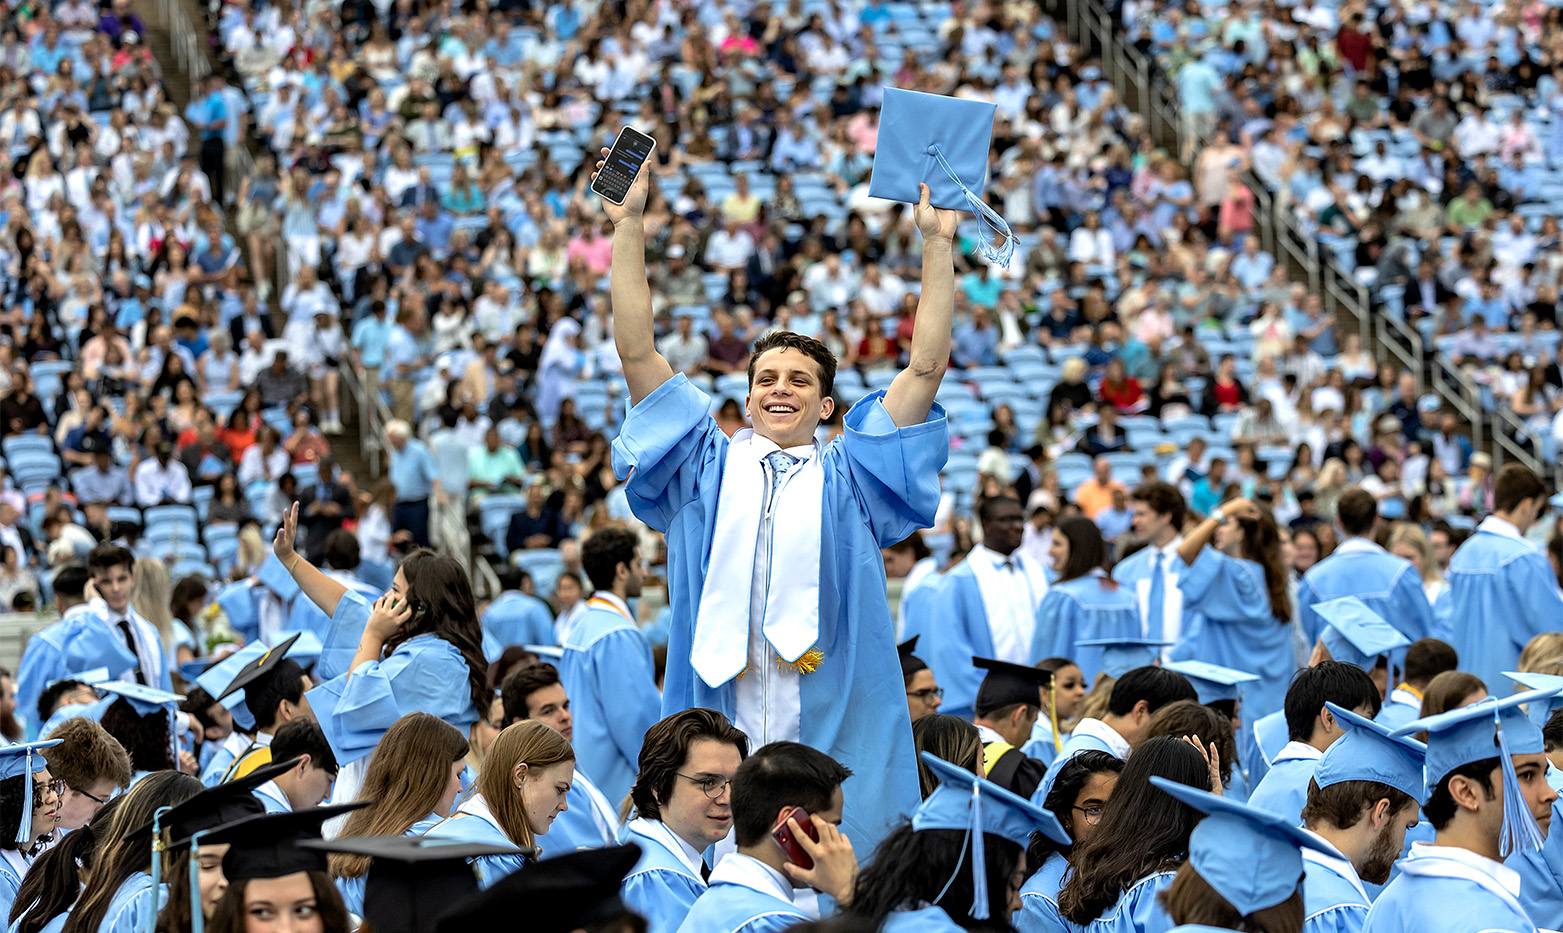 A graduate waving to the crowd.